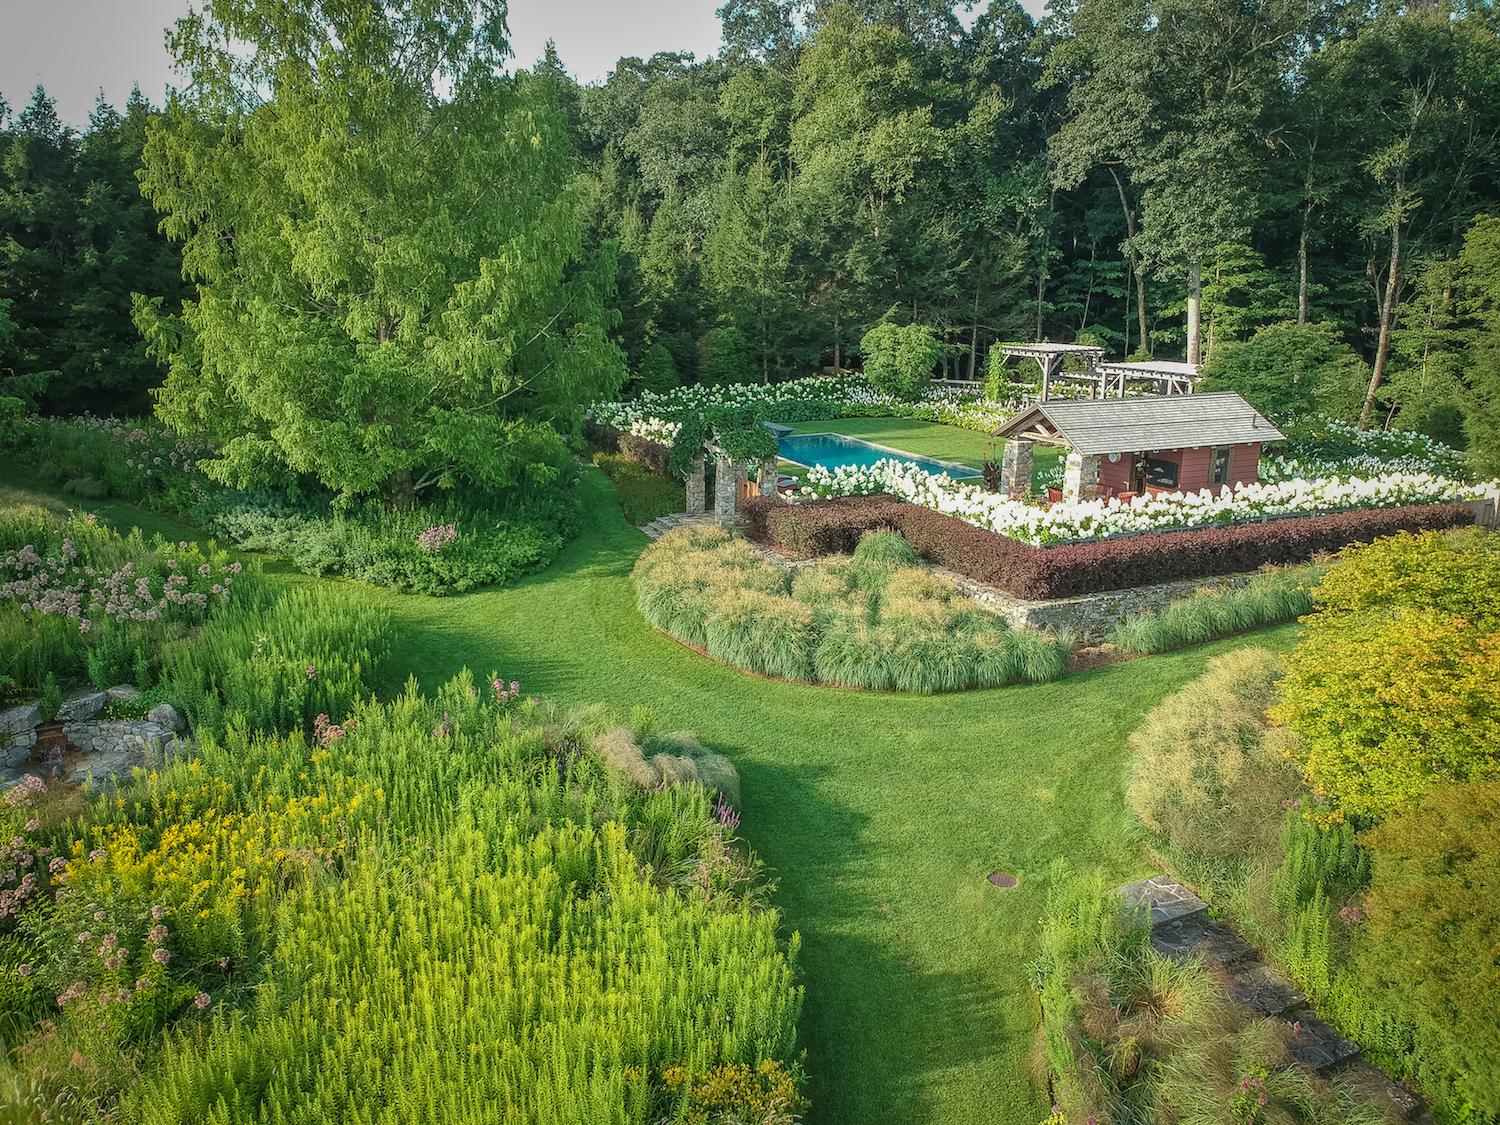 This Connecticut Property Is Enveloped By a Dreamlike Garden Oasis 